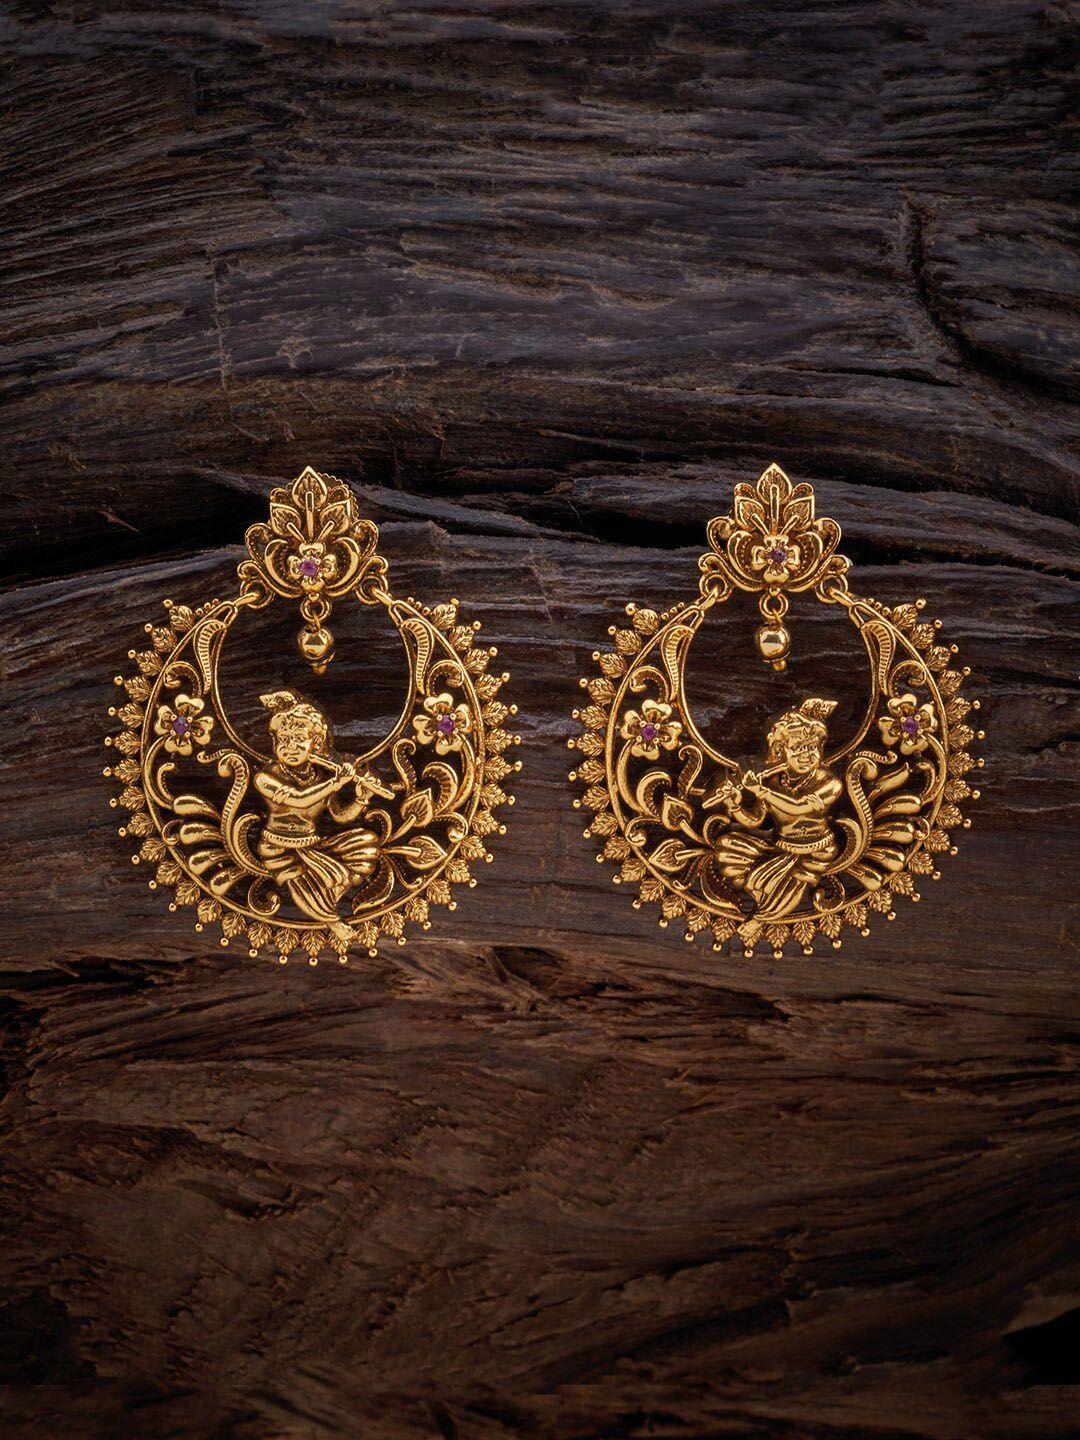 kushal's fashion jewellery gold-plated drop earrings